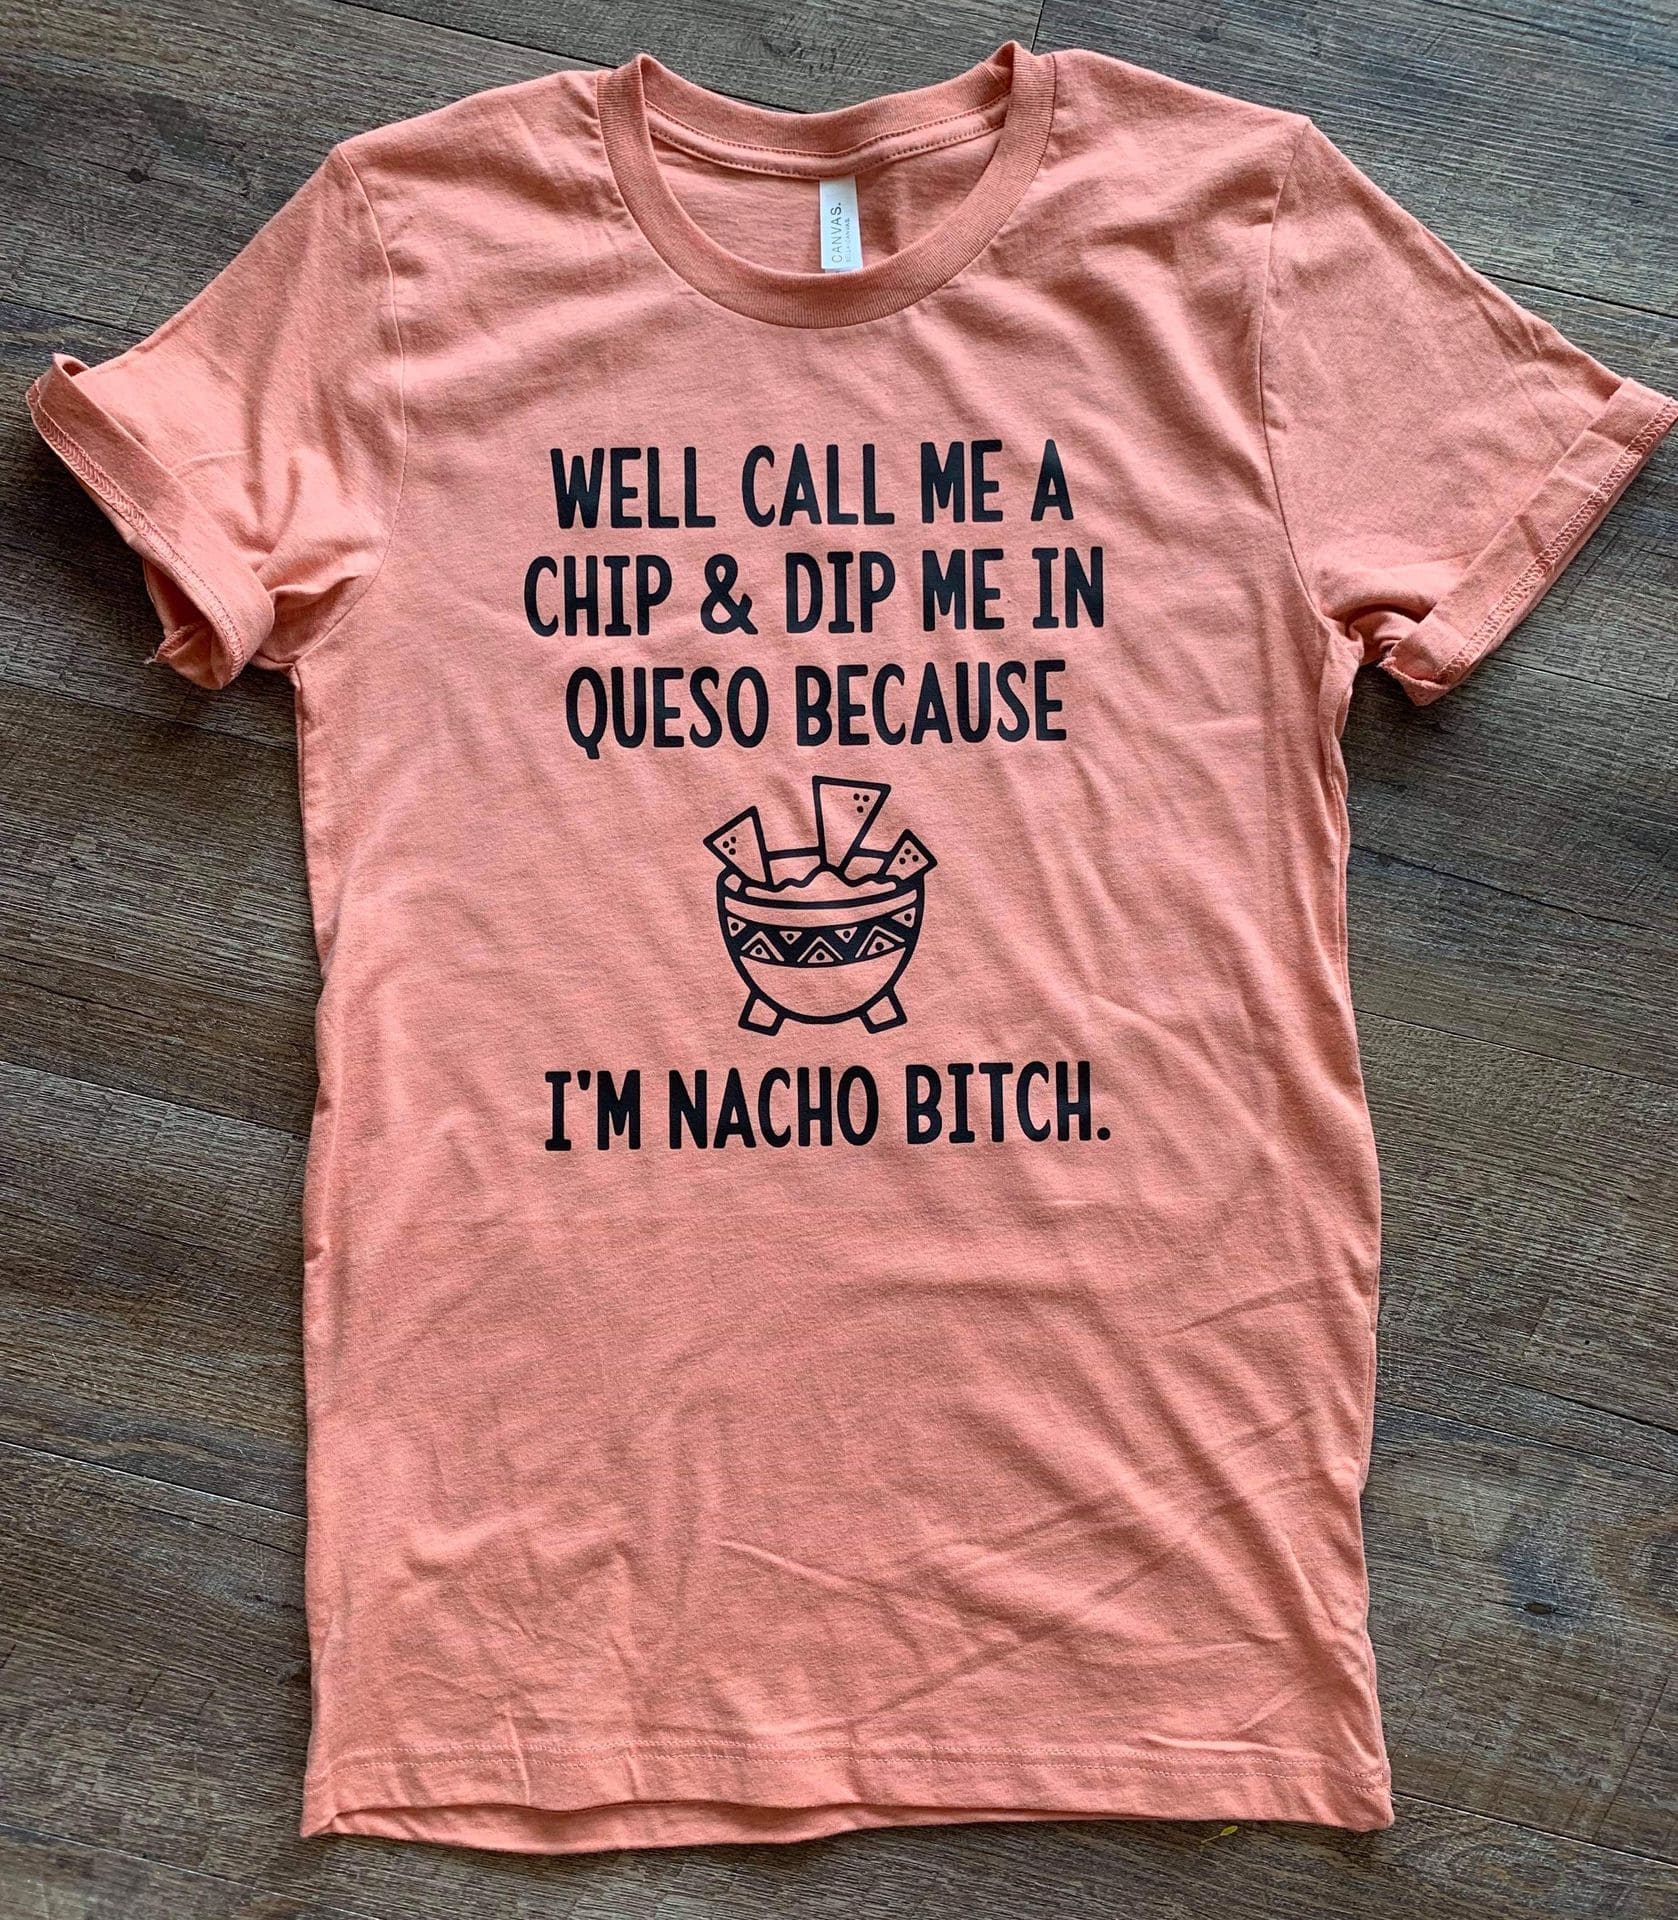 Well call me chip and dip me in queso because I'm nacho bitch - Nacho mexican food